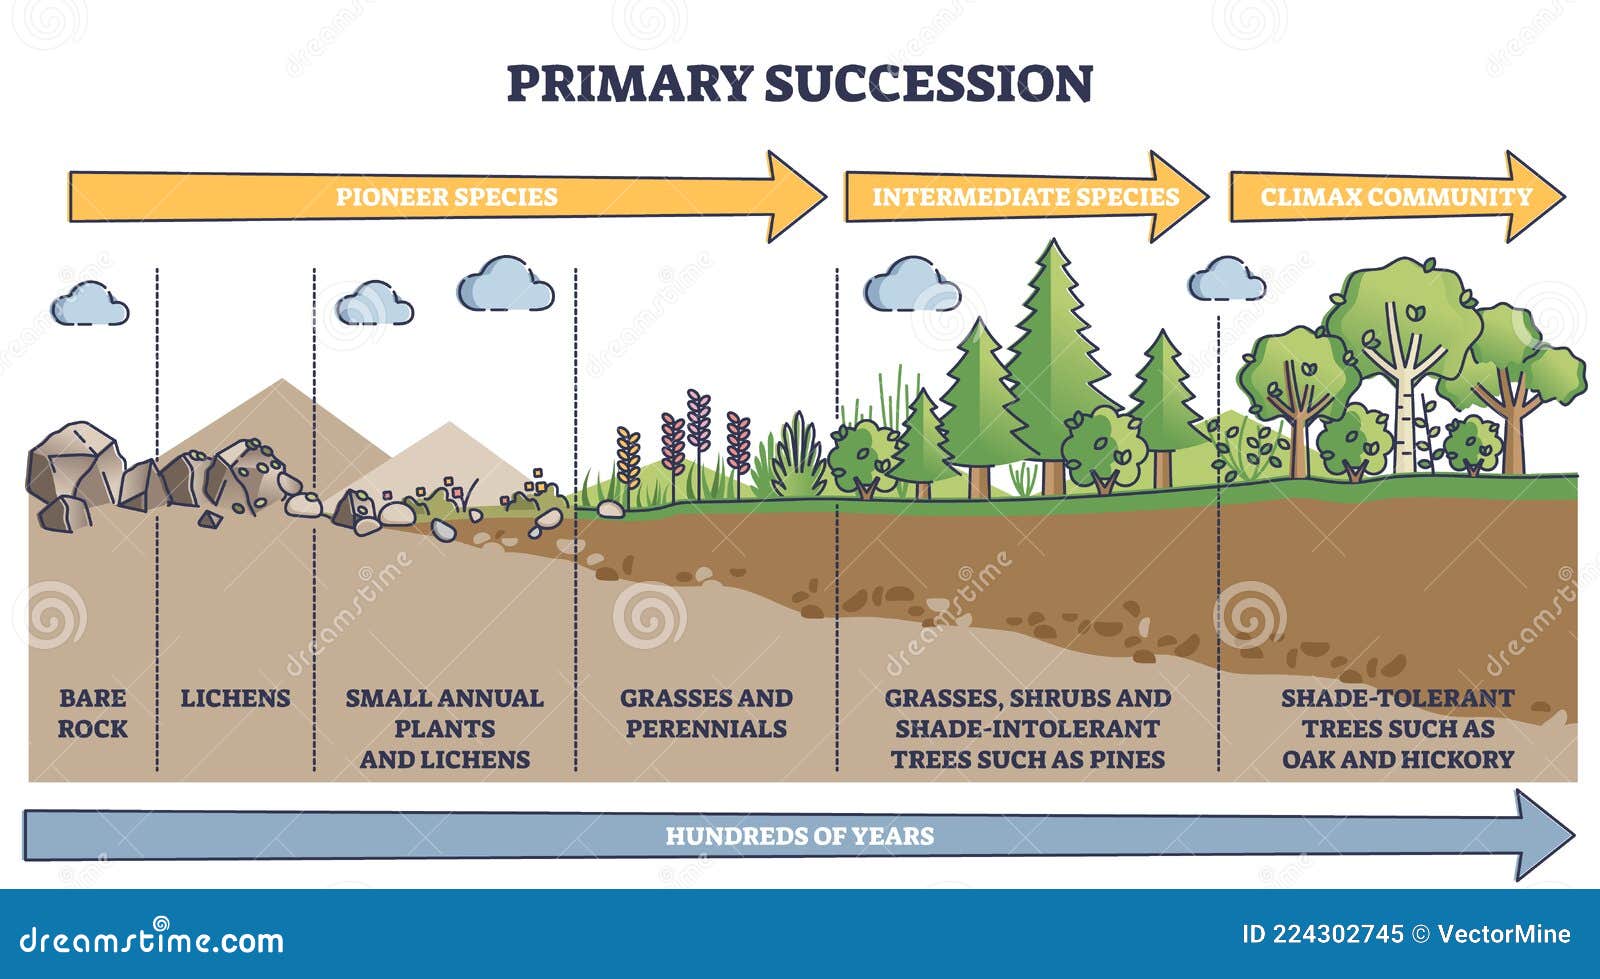 primary succession and ecological growth process stages outline diagram